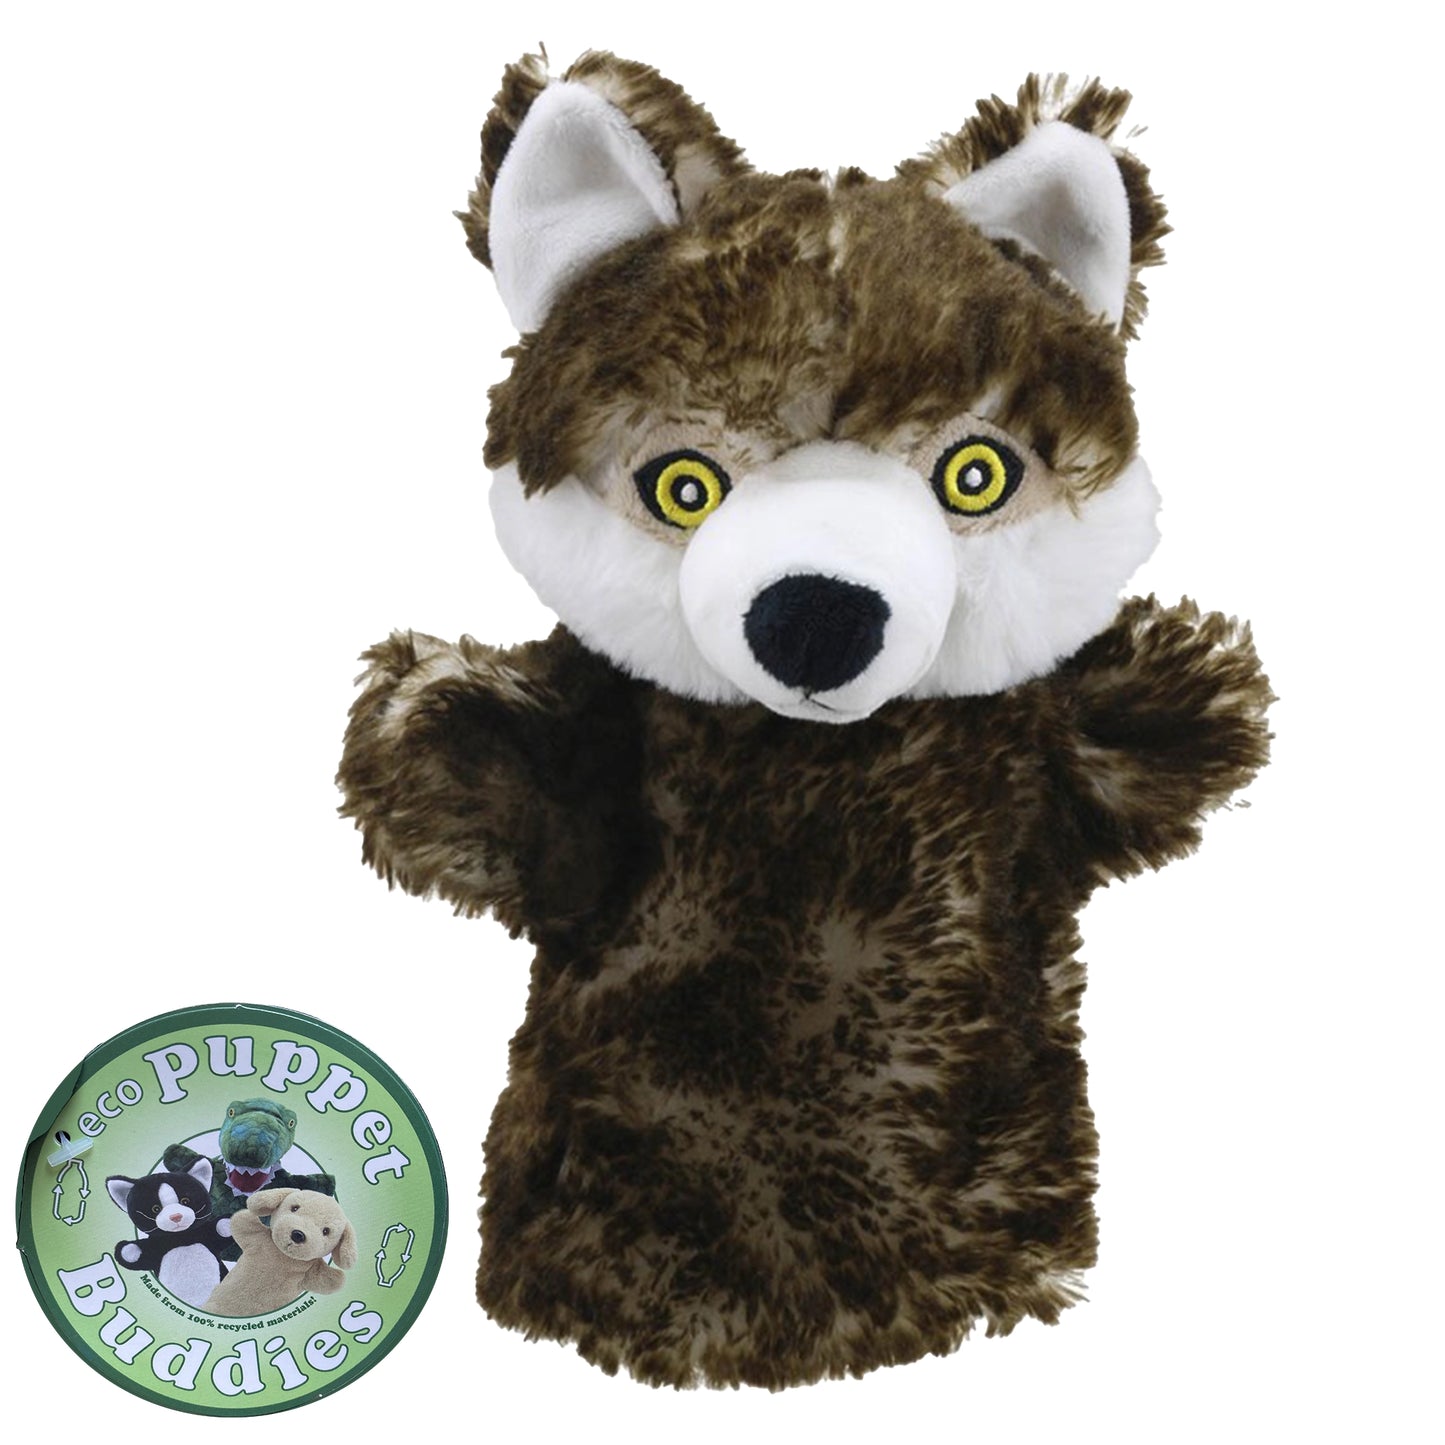 Wolf Eco Puppet Buddies Hand Puppet - The Puppet Company - The Forgotten Toy Shop